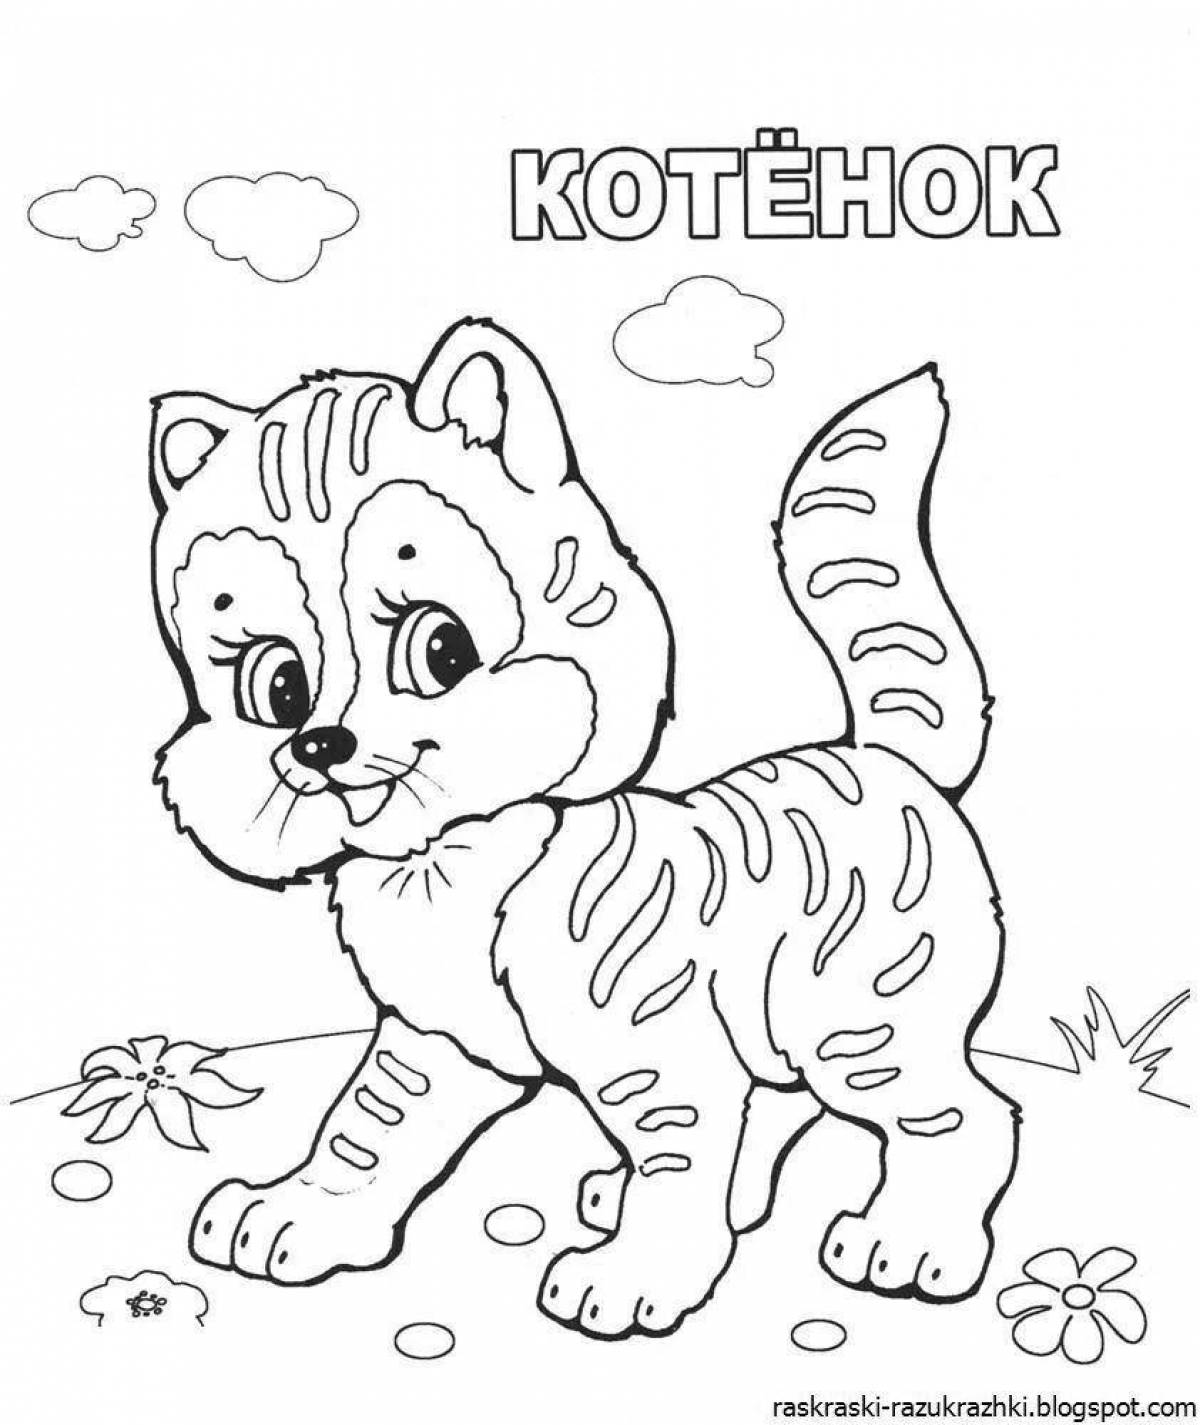 Glittering animal coloring book for kids 6-10 years old